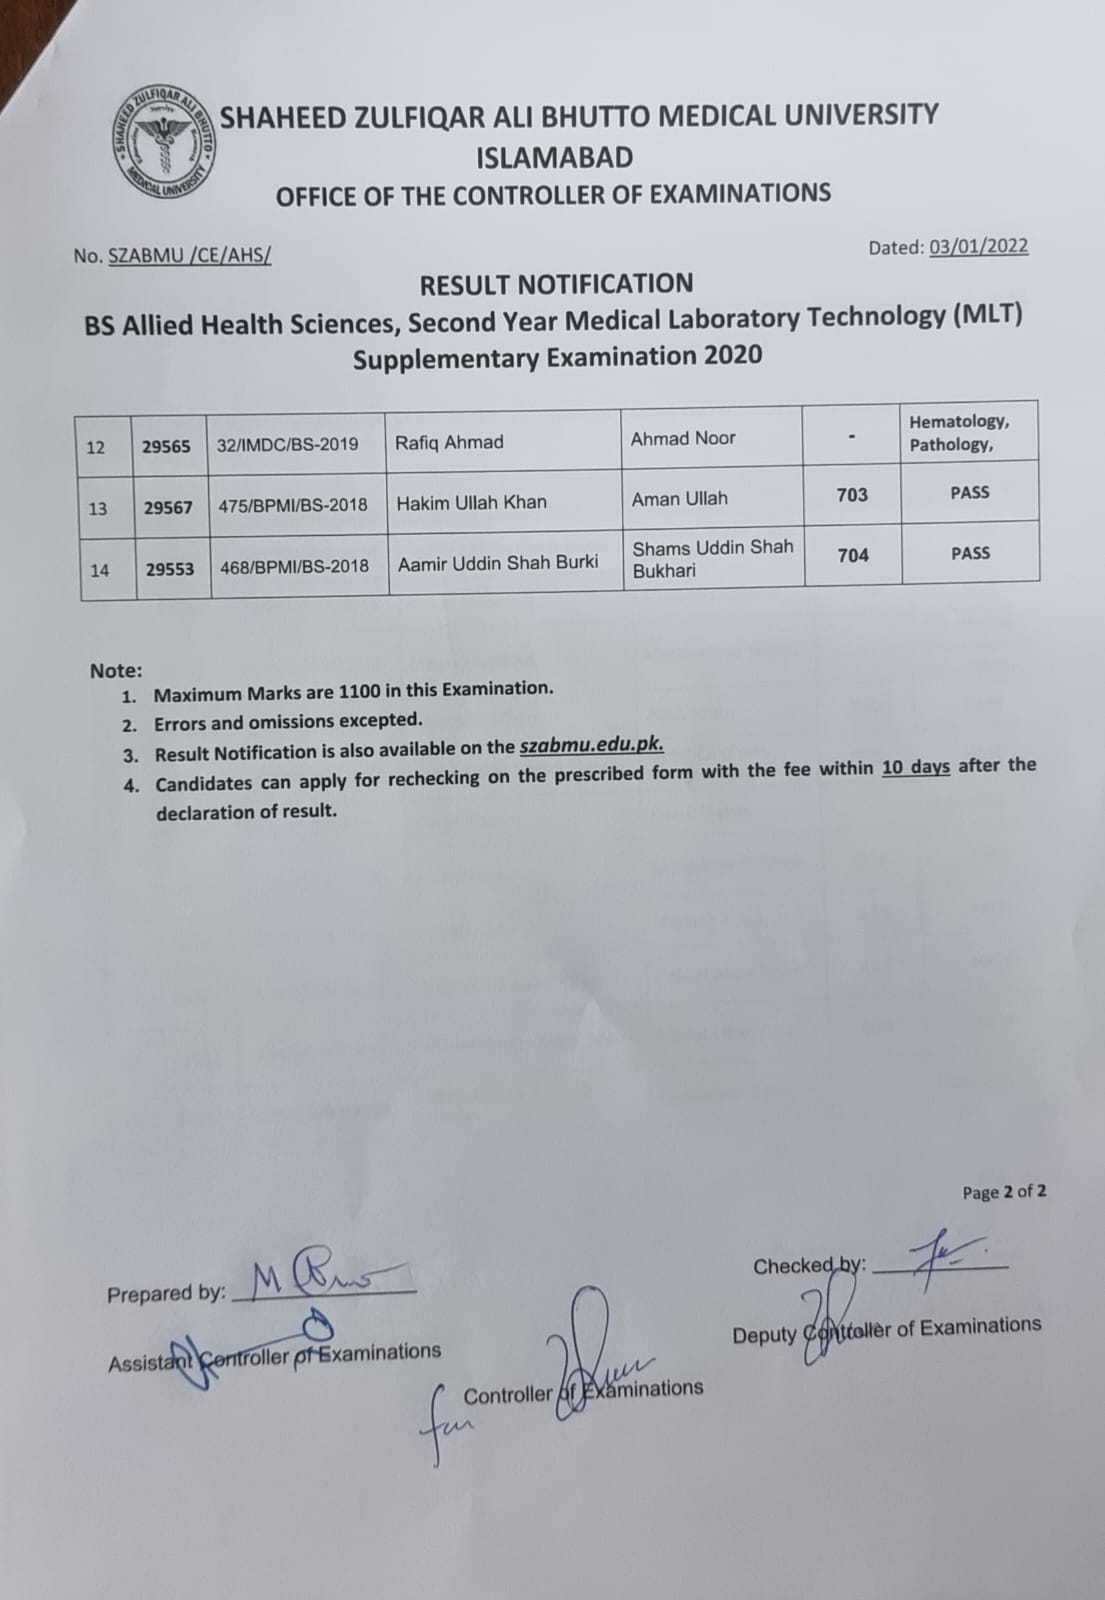 Result Notification - Second Year MLT Supplementary Exams 2020